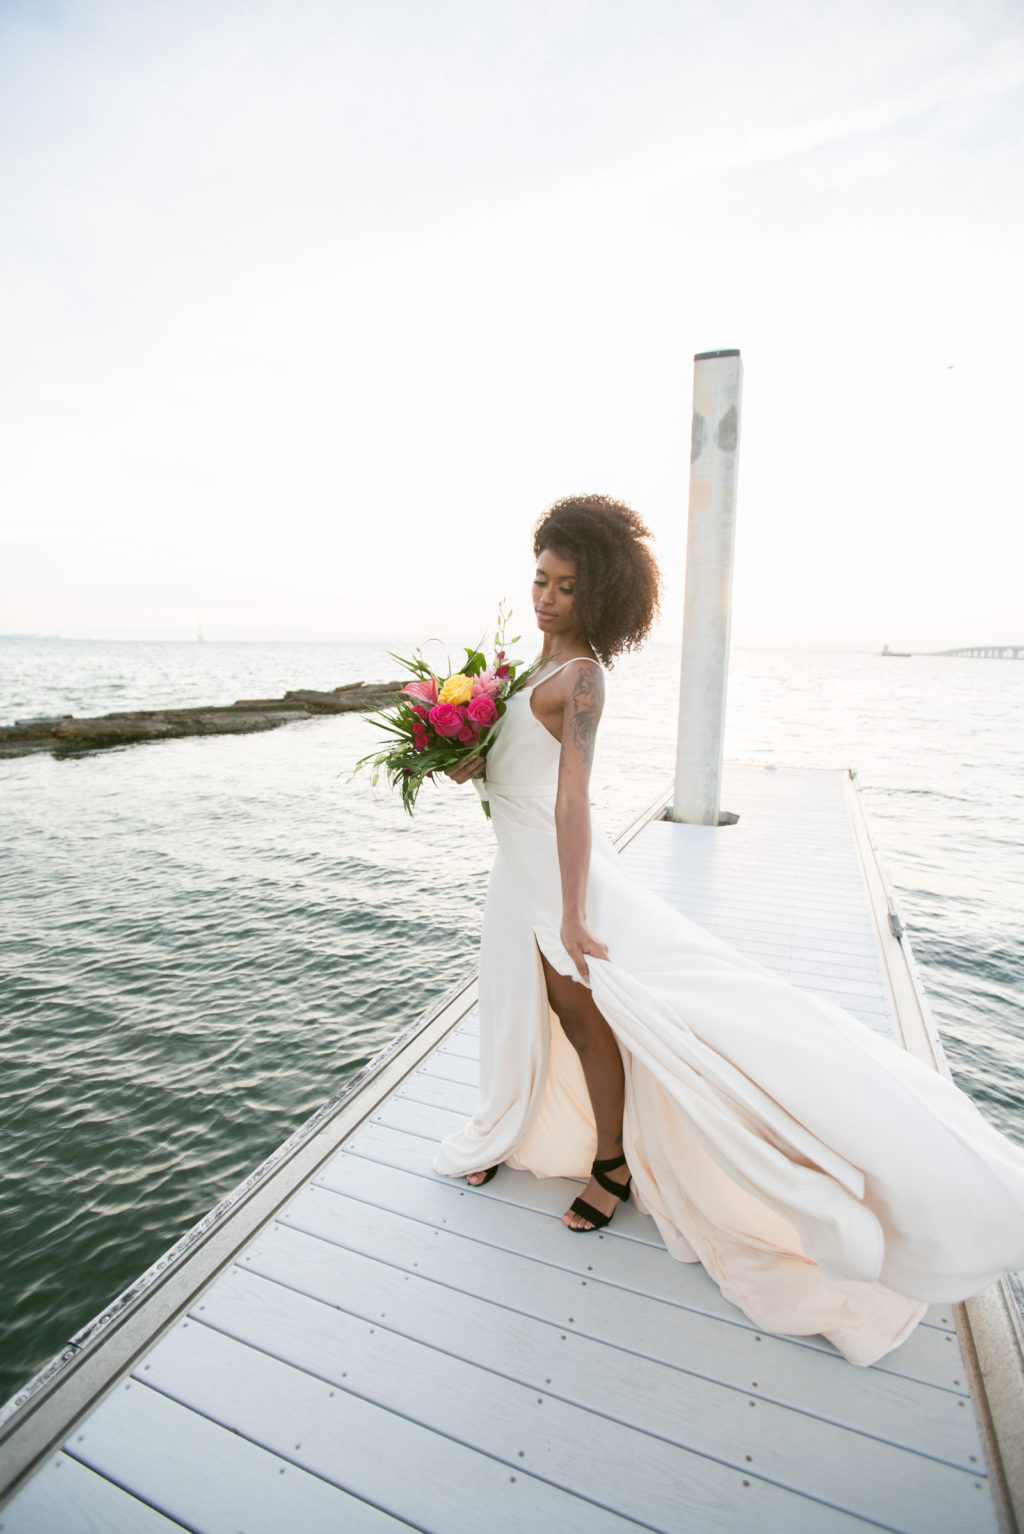 Modern Tropical Inspired Florida Bride, On Waterfront Pier in Boho Off-White Dress with High Slip, Holding Vibrant Bridal Bouquet